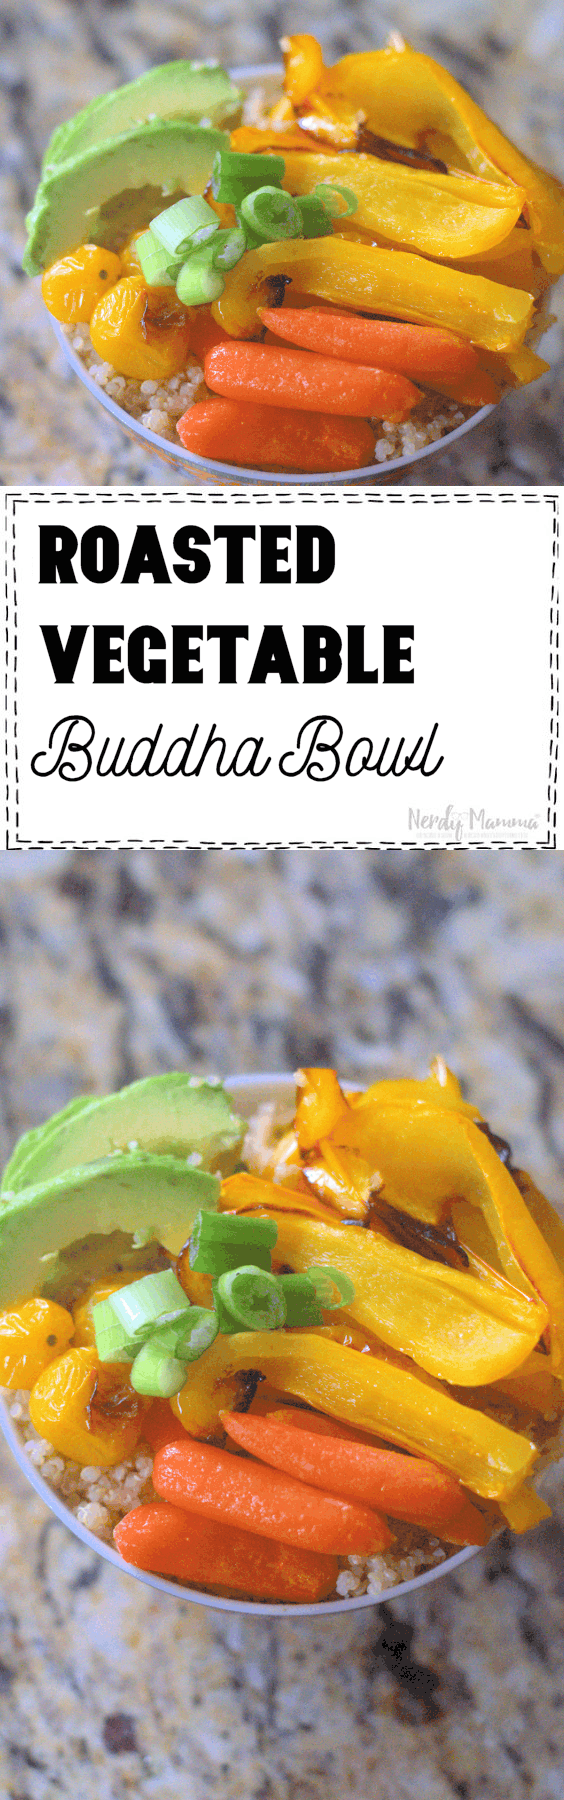 A simple, fun lunch idea: Roasted Vegetable Budda Bowl. Perfect for a quick lunch at home on the weekends, it's light, simple and really healthy. I mean, who doesn't love a whole bunch of roasted veggies?! #nerdymammablog #buddahbowl #roastedveggies #roastedvegetables #simplelunch #buddah #veggies #vegetable #tasty #lunch #prettyfood